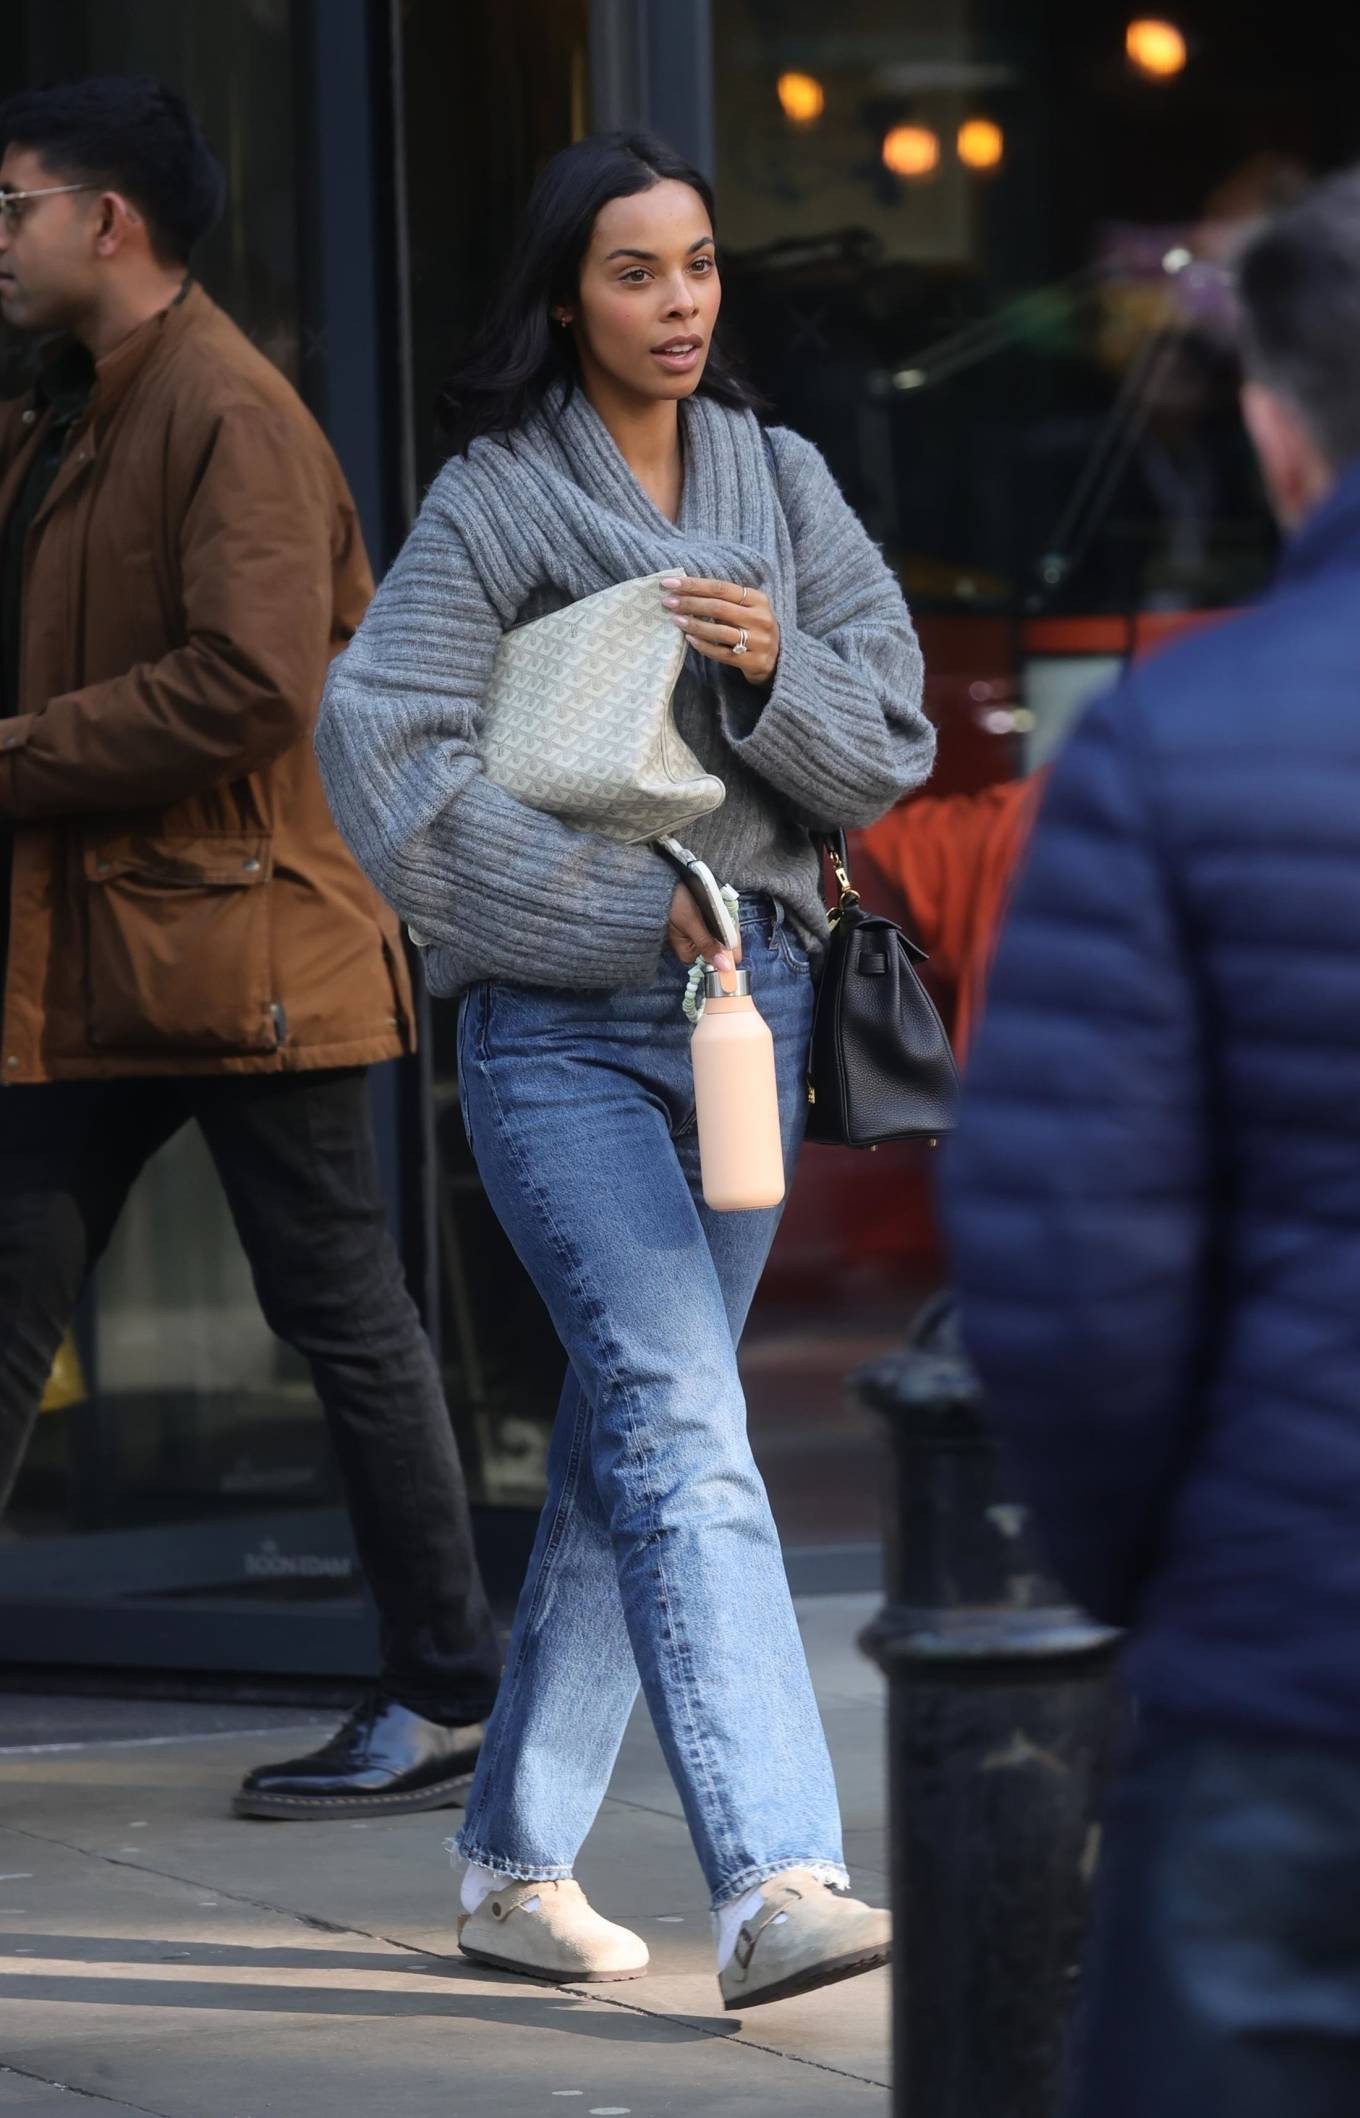 Rochelle Humes - In a grey sweater stepping out in London's Soho